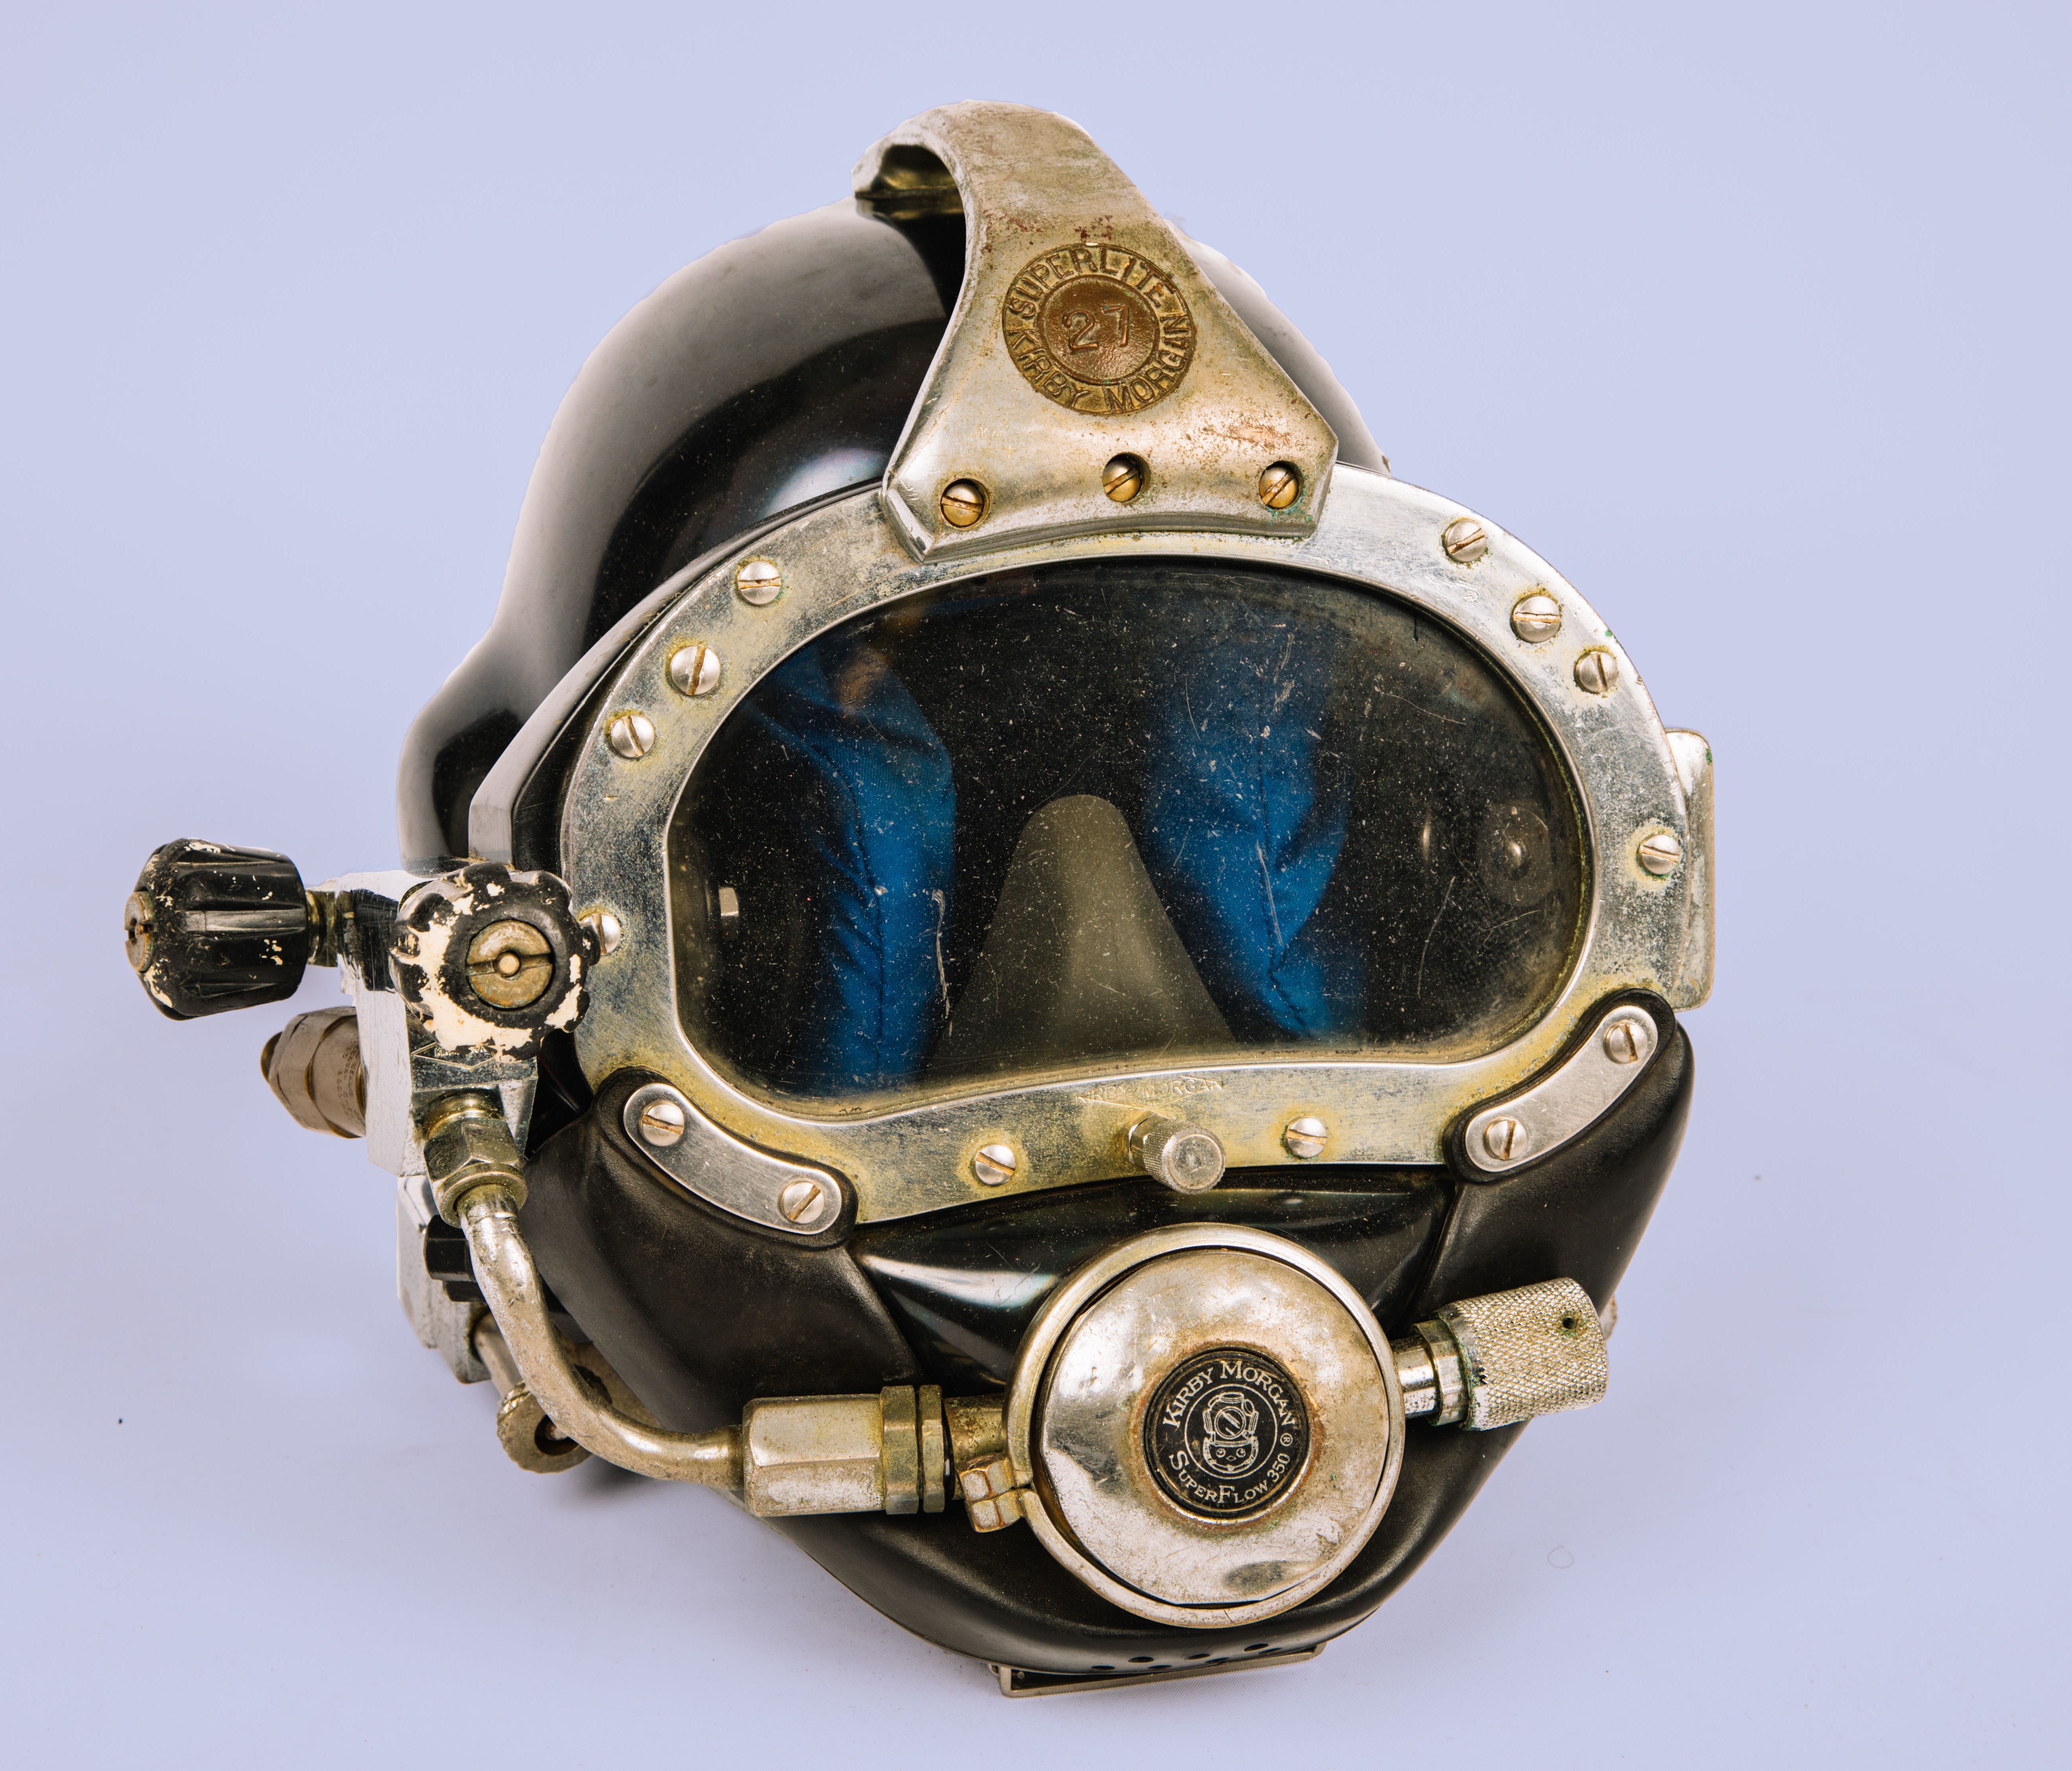 Deep water diving helmet. Weighs nearly 30 pounds.